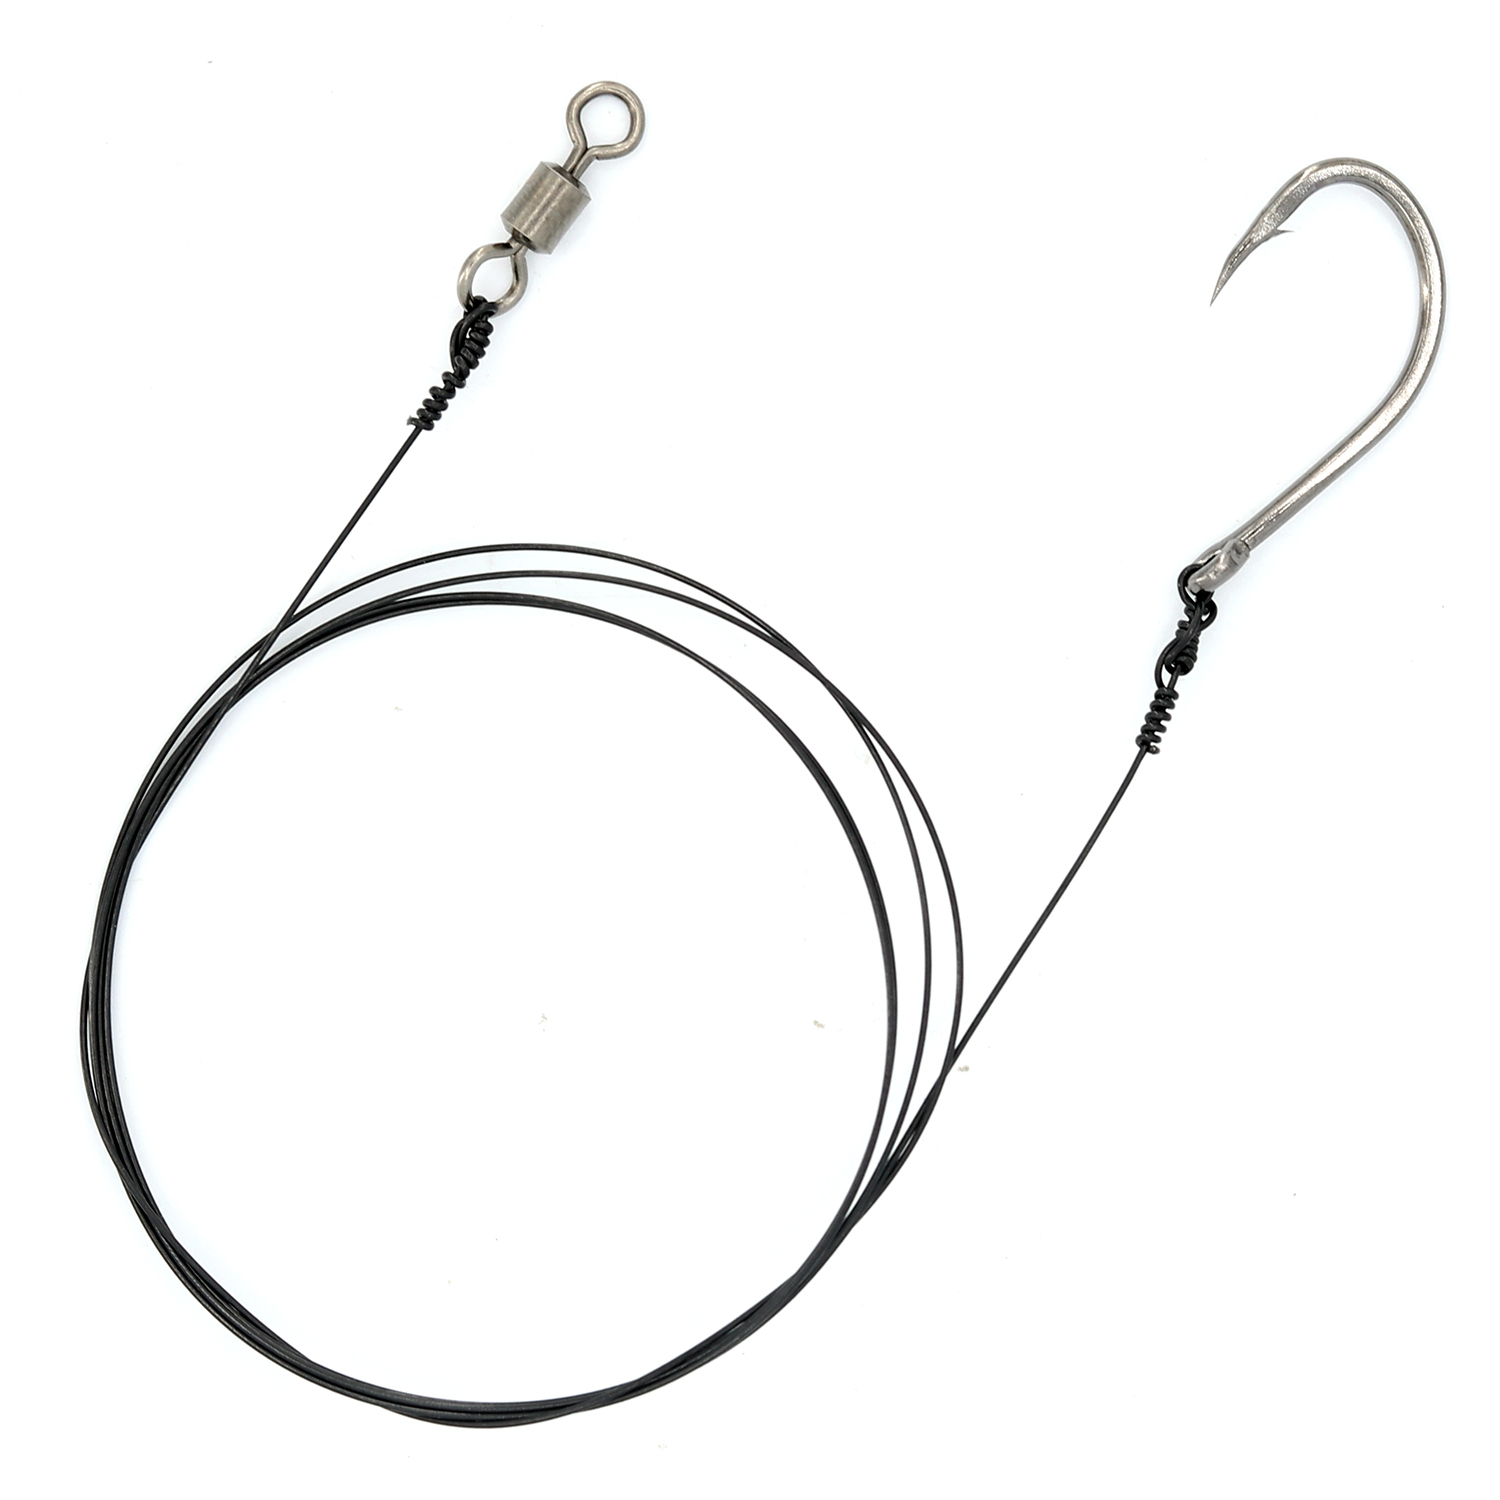 qareb american wire single hook rig, hook size 0/6 and wire test 30lb